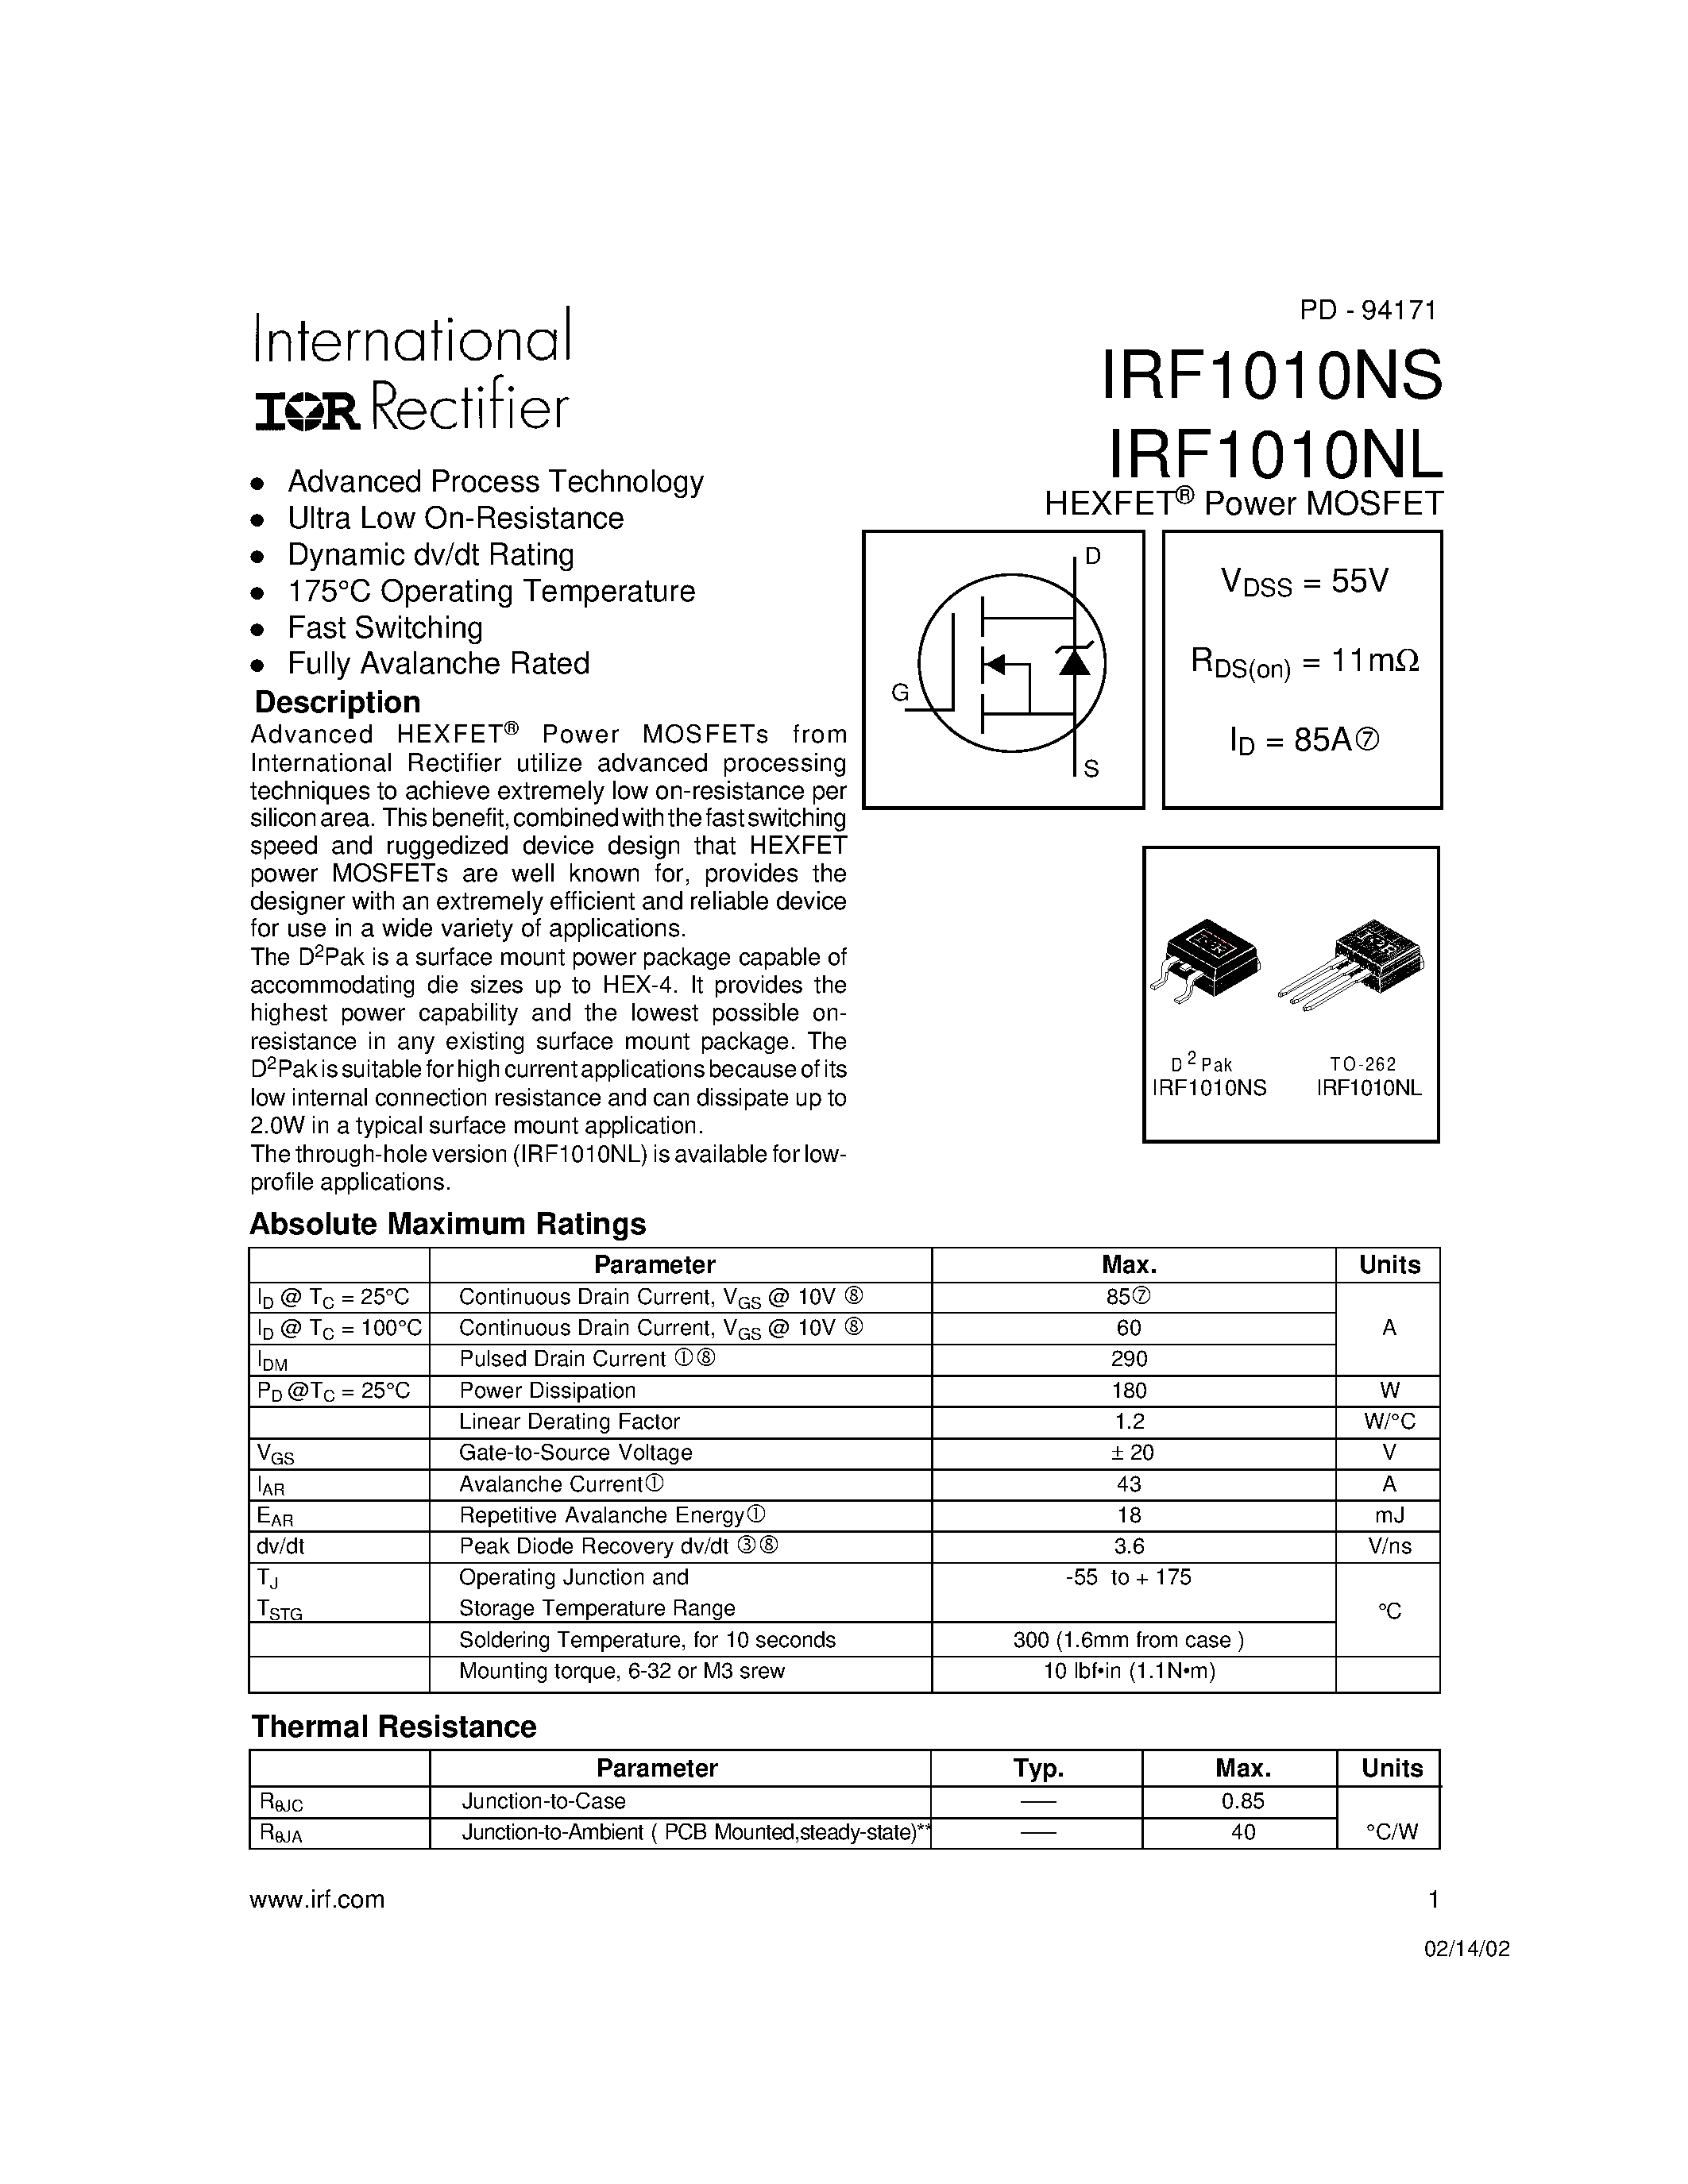 Datasheet IRF1010NS - Power MOSFET(Vdss = 55 V/ Rds(on)=11mohm/ Id=85A) page 1